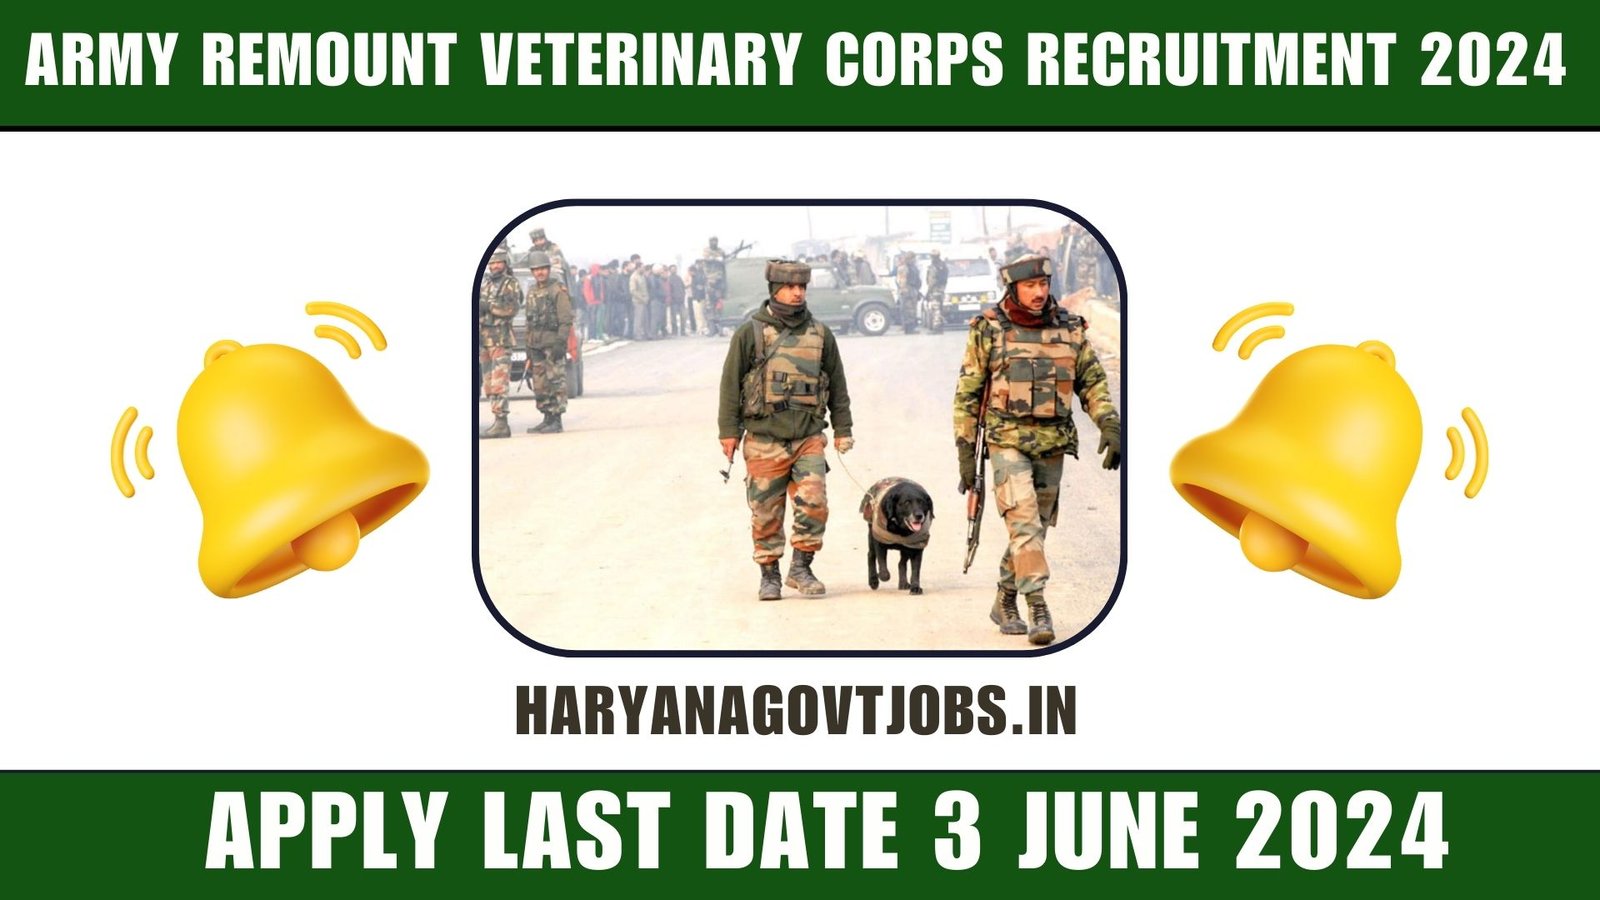 Army Remount Veterinary Corps Recruitment 2024 Overview